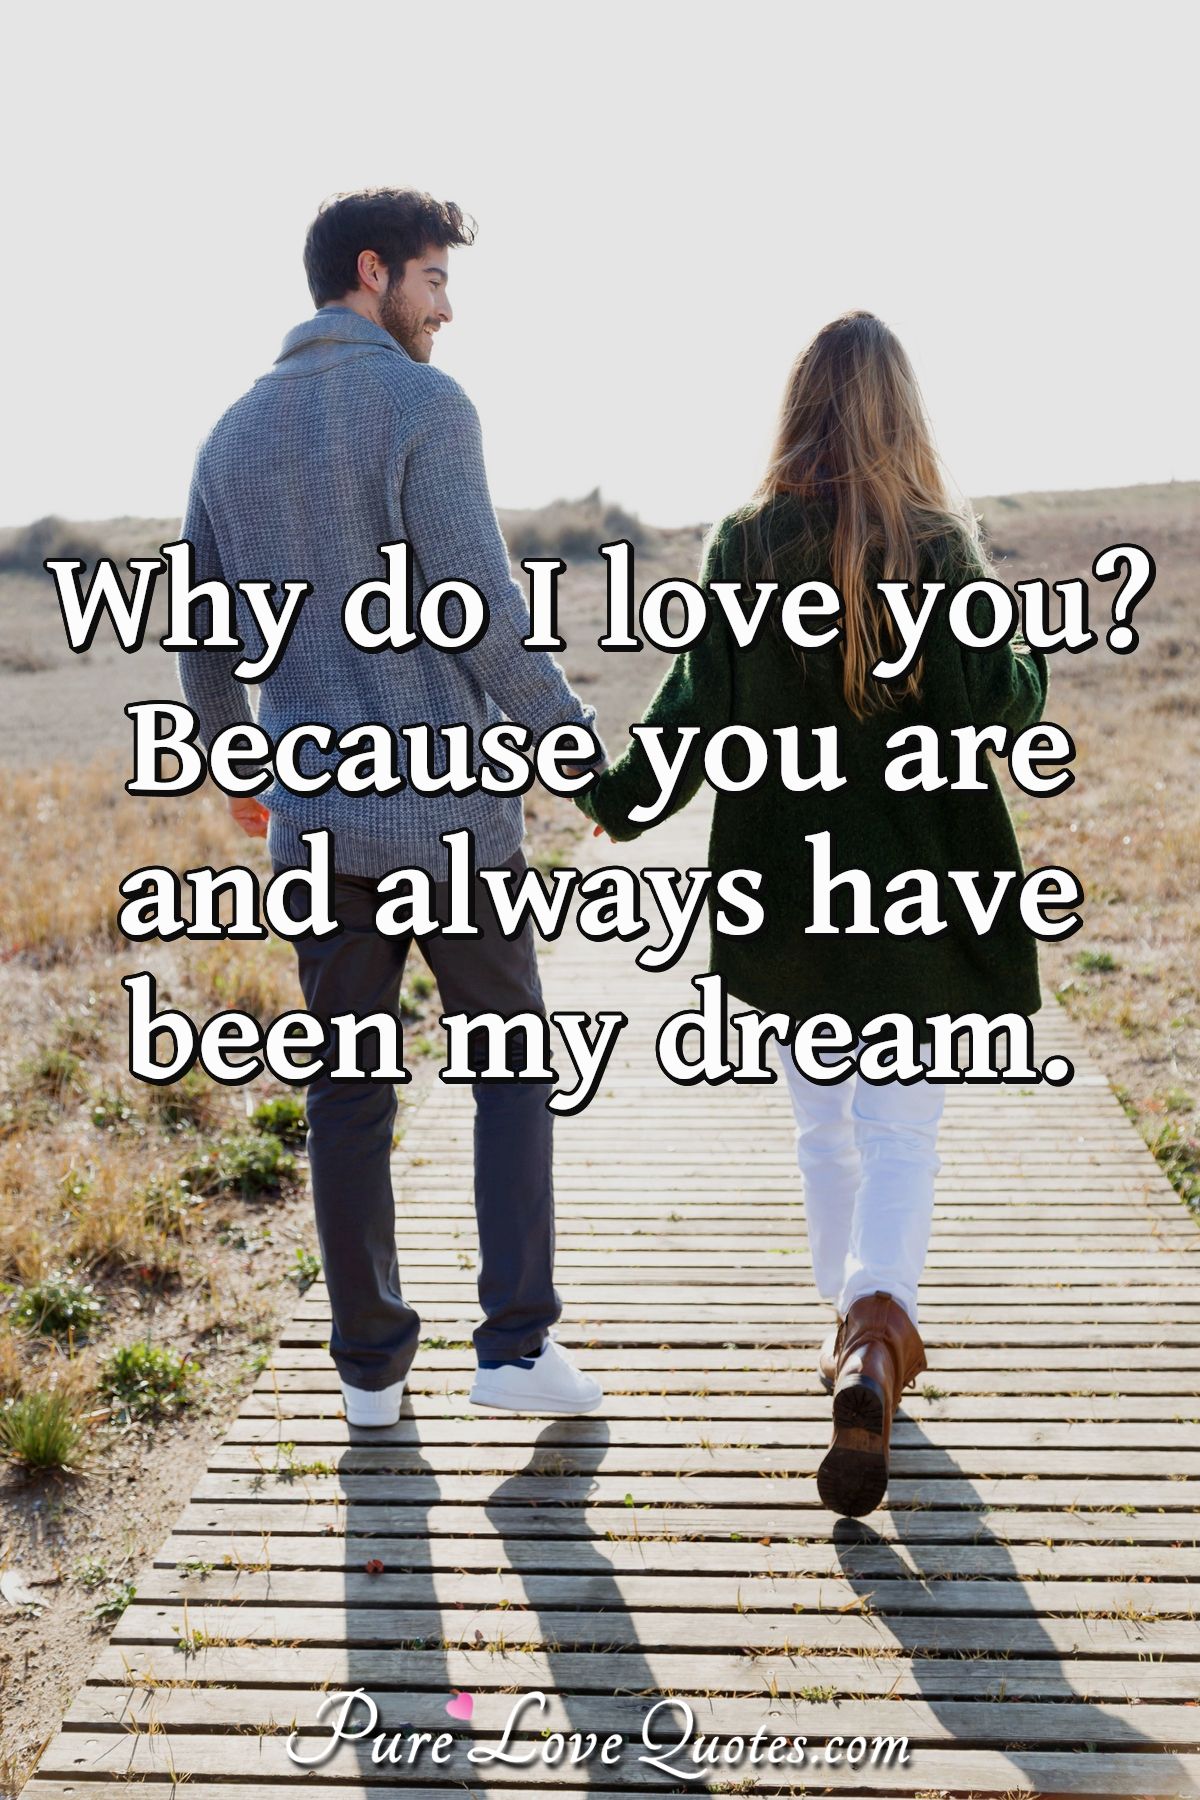 Why do I love you? Because you are and always have been my dream. - Anonymous